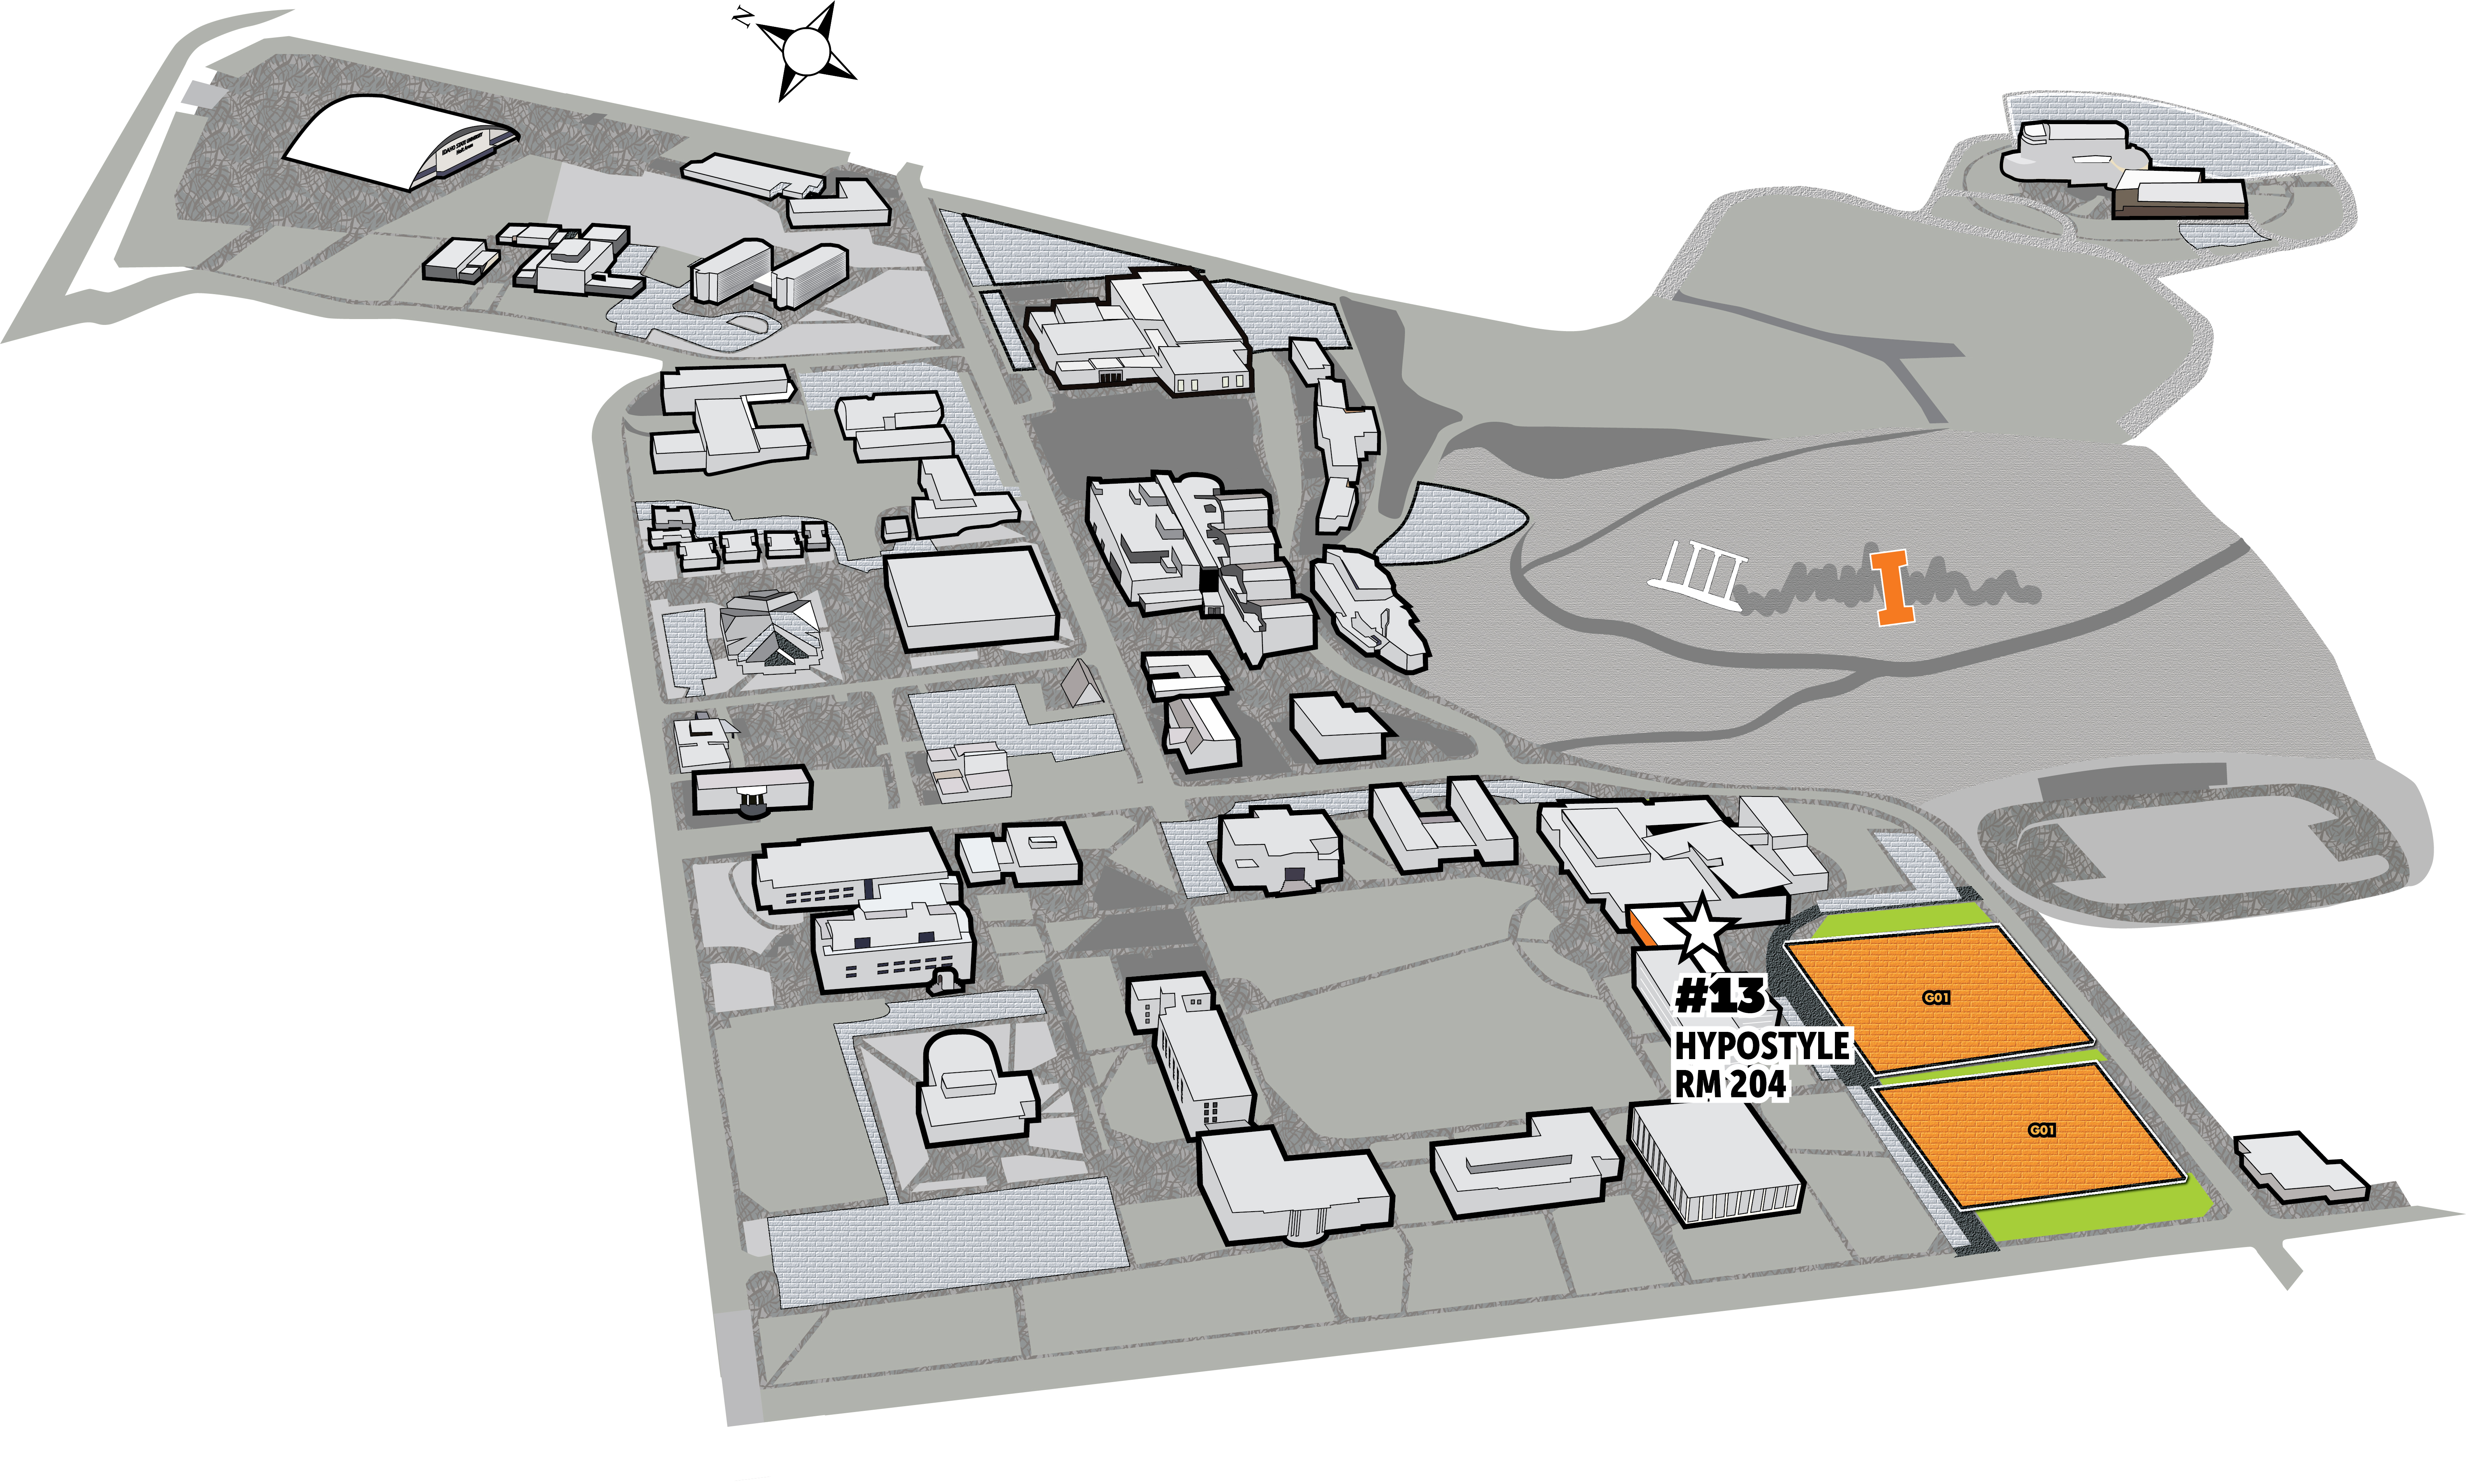 A map of campus, highlighting the Hypostyle building between the SUB and museum.